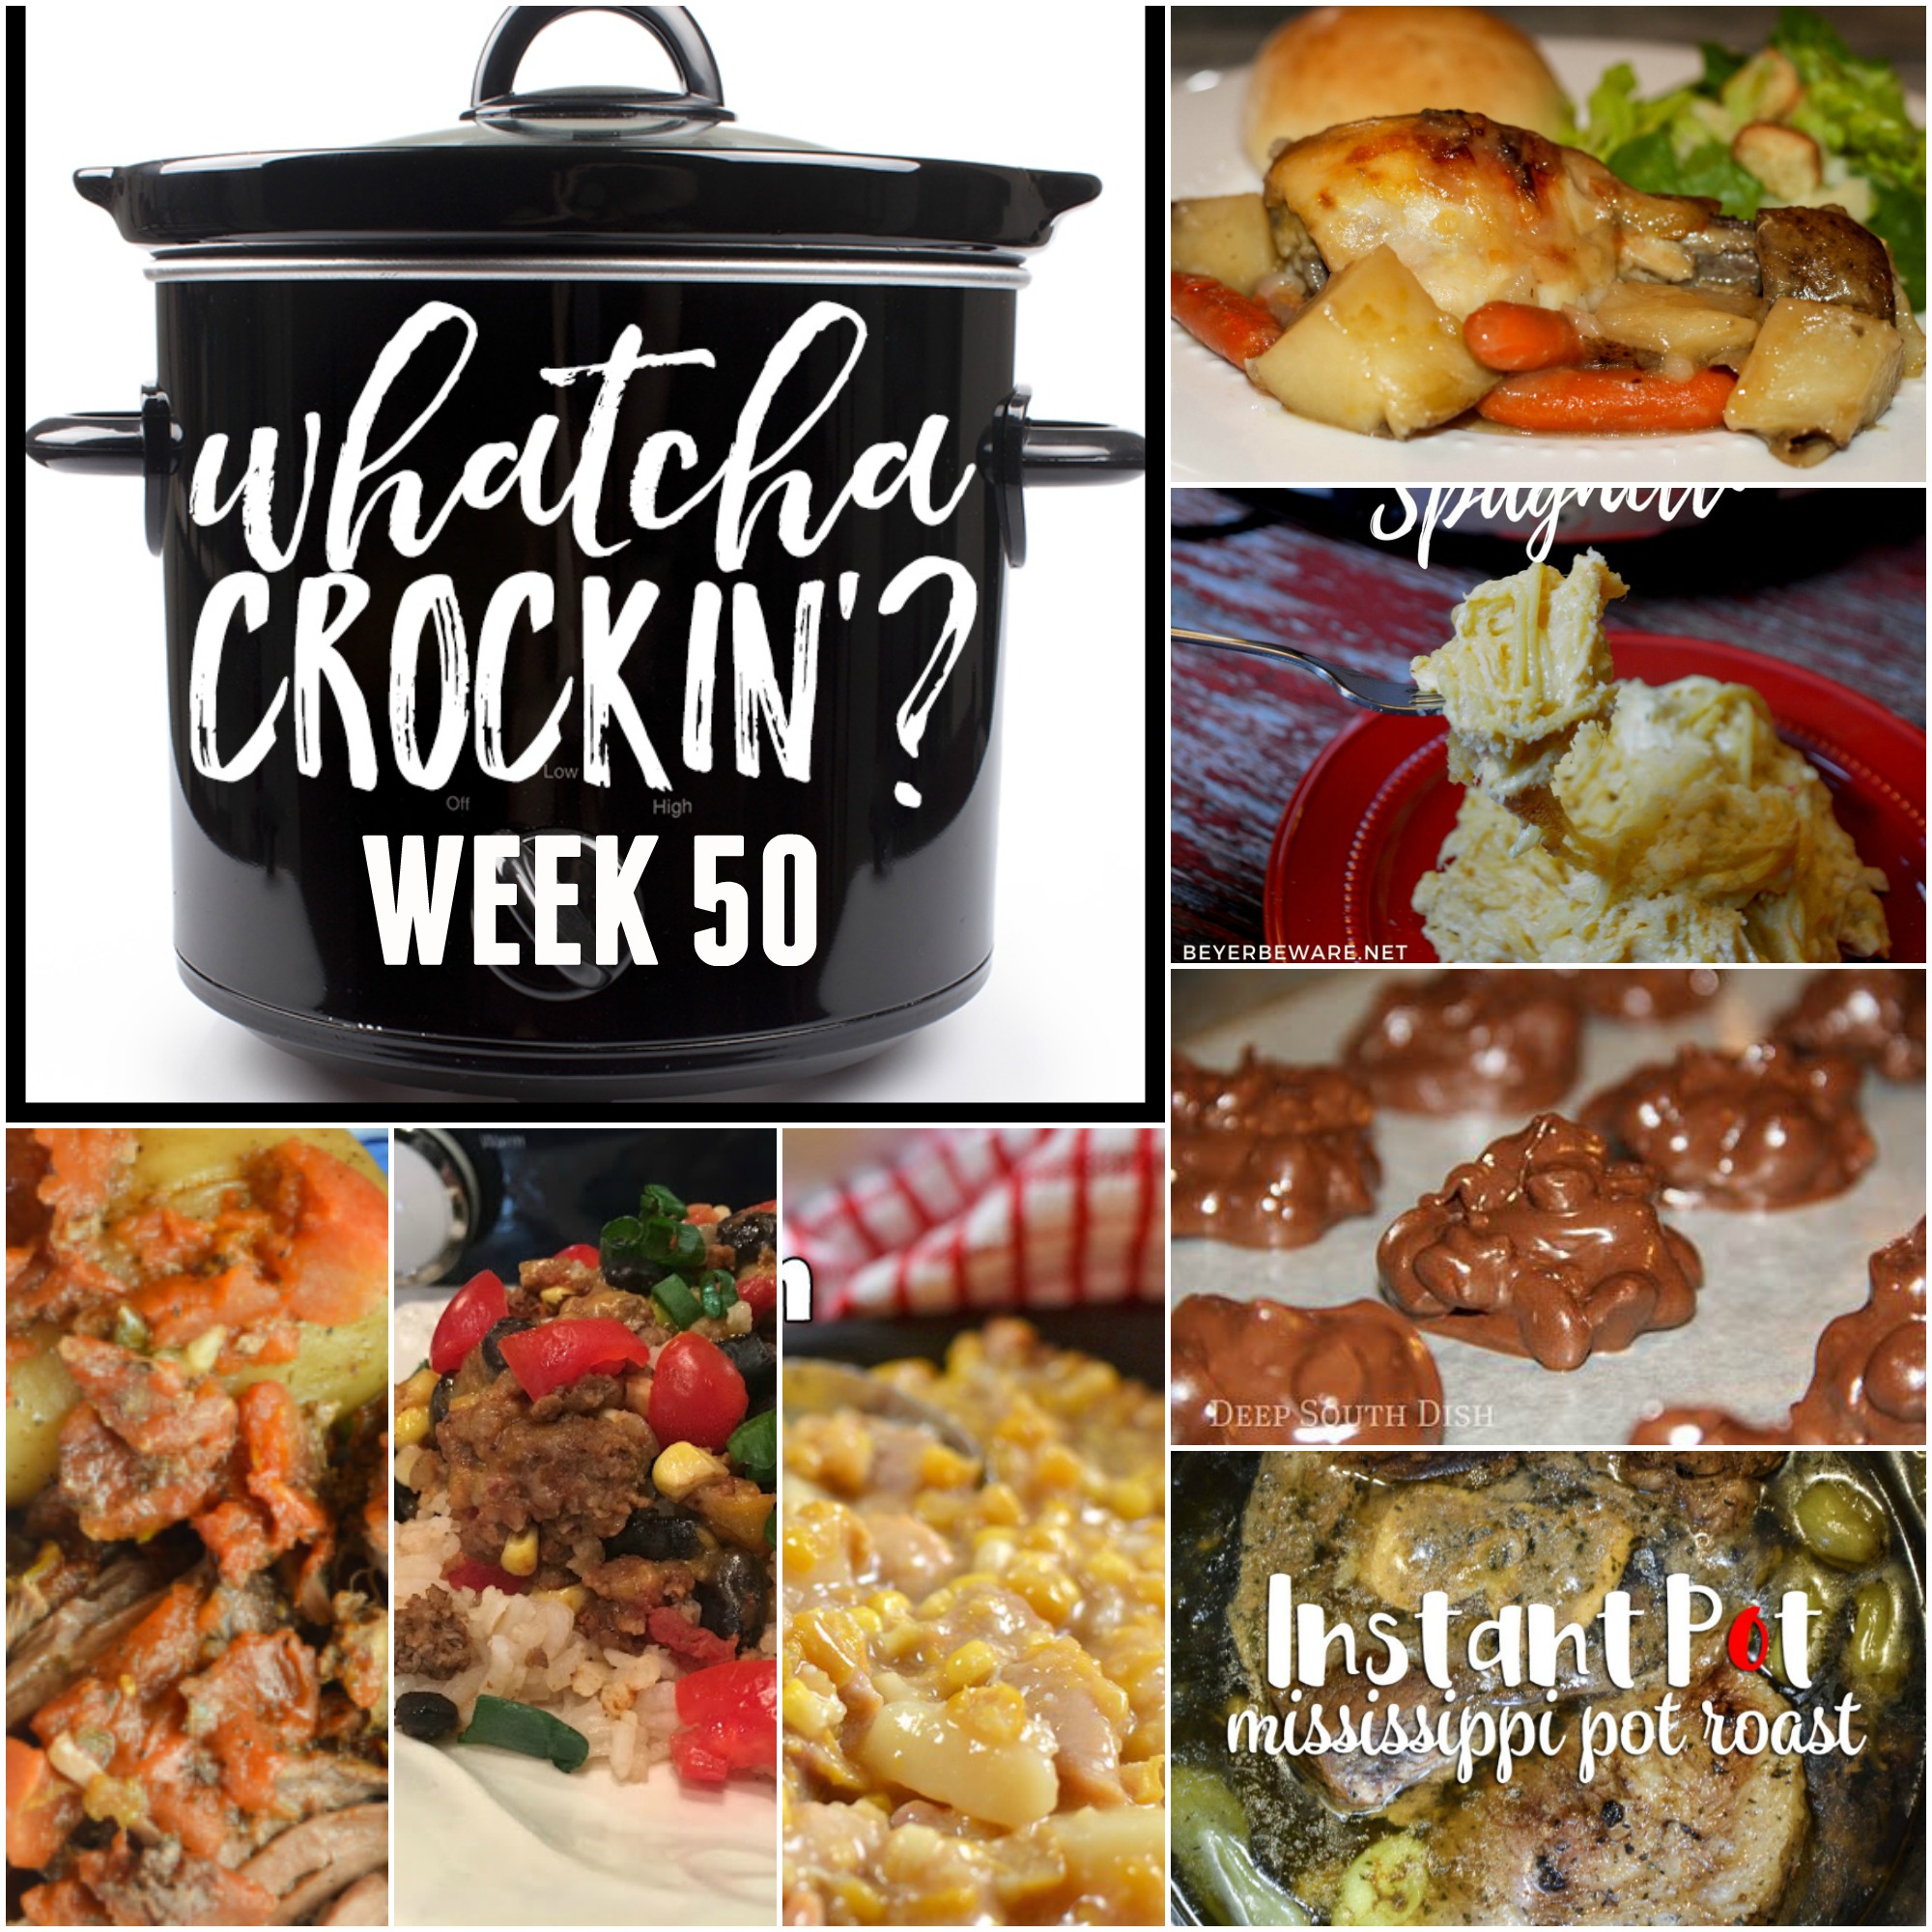 This week’s Whatcha Crockin’ crock pot recipes include Crock Pot Peanut Candy Clusters, No Fuss Chicken Dinner, Mississippi Pot Roast - Electric Pressure Cooker, Slow Cooker Greek Beef and Potatoes, Crock Pot Creamy Chicken Spaghetti, Slow Cooker Chicken Corn Chowder, Crock Pot Taco Rice Casserole.